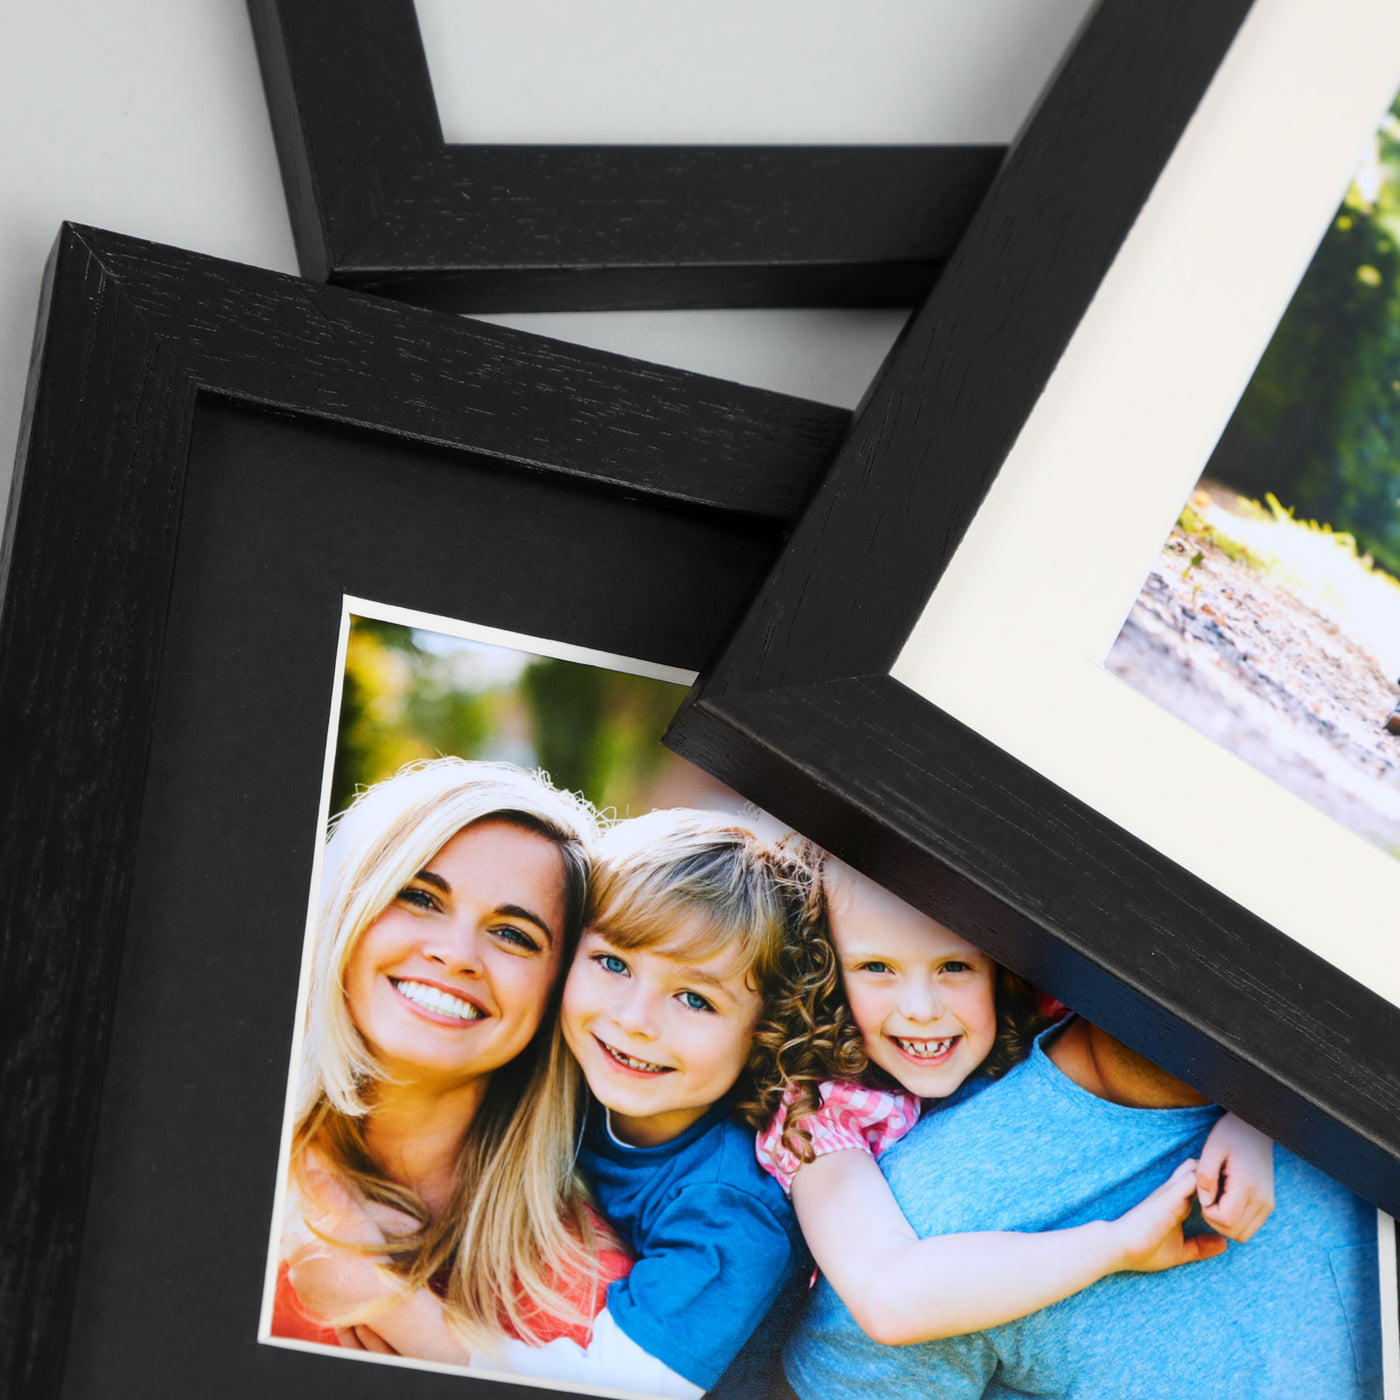 6x6 Classic Black Picture Frame with a 4x4 Mount